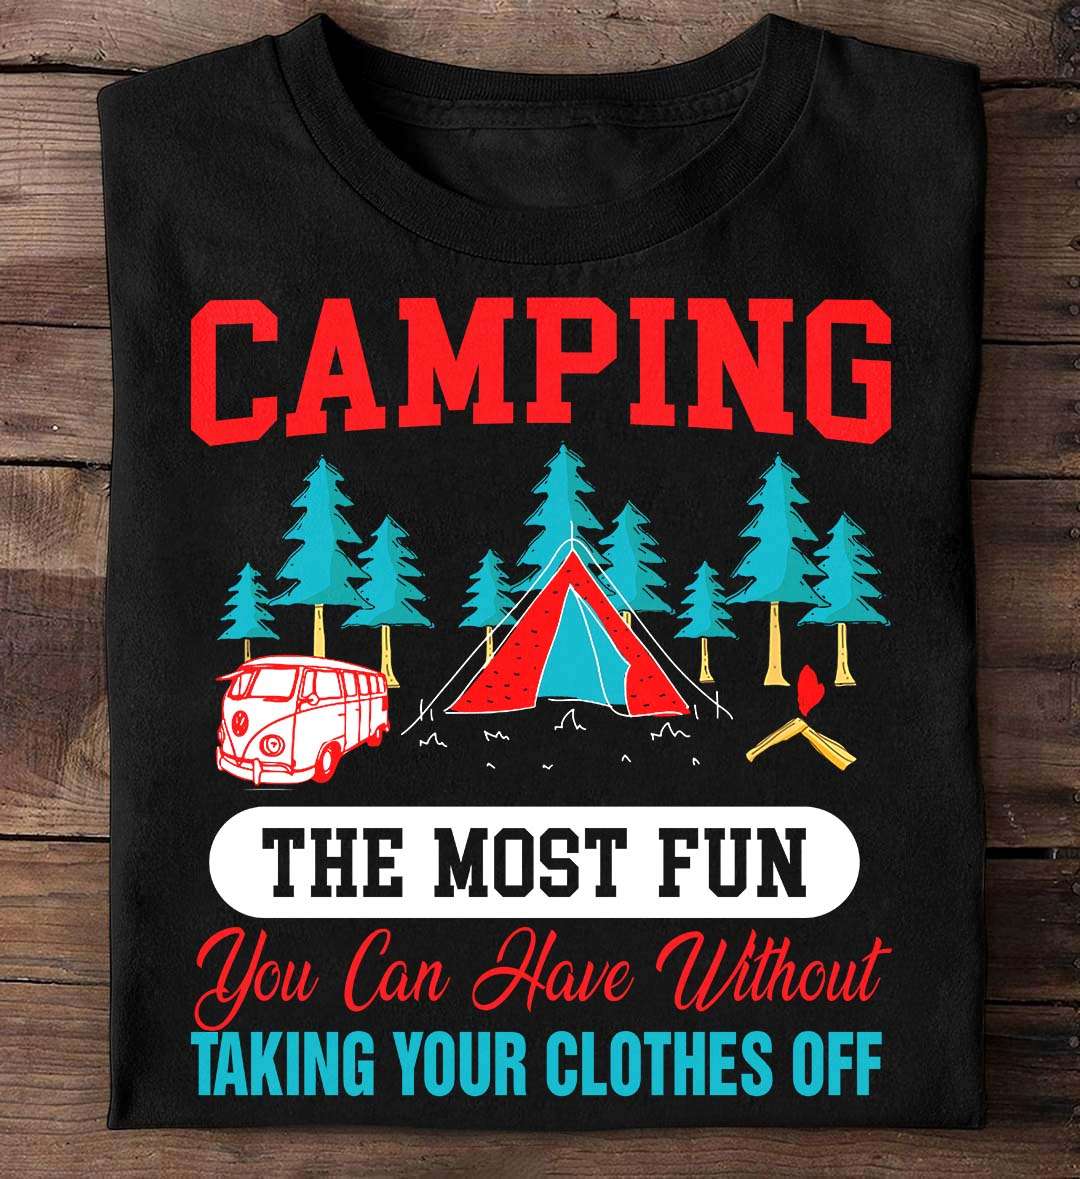 Love Camping, Camping Costume - Camping the most fun you can have without taking your clothes off